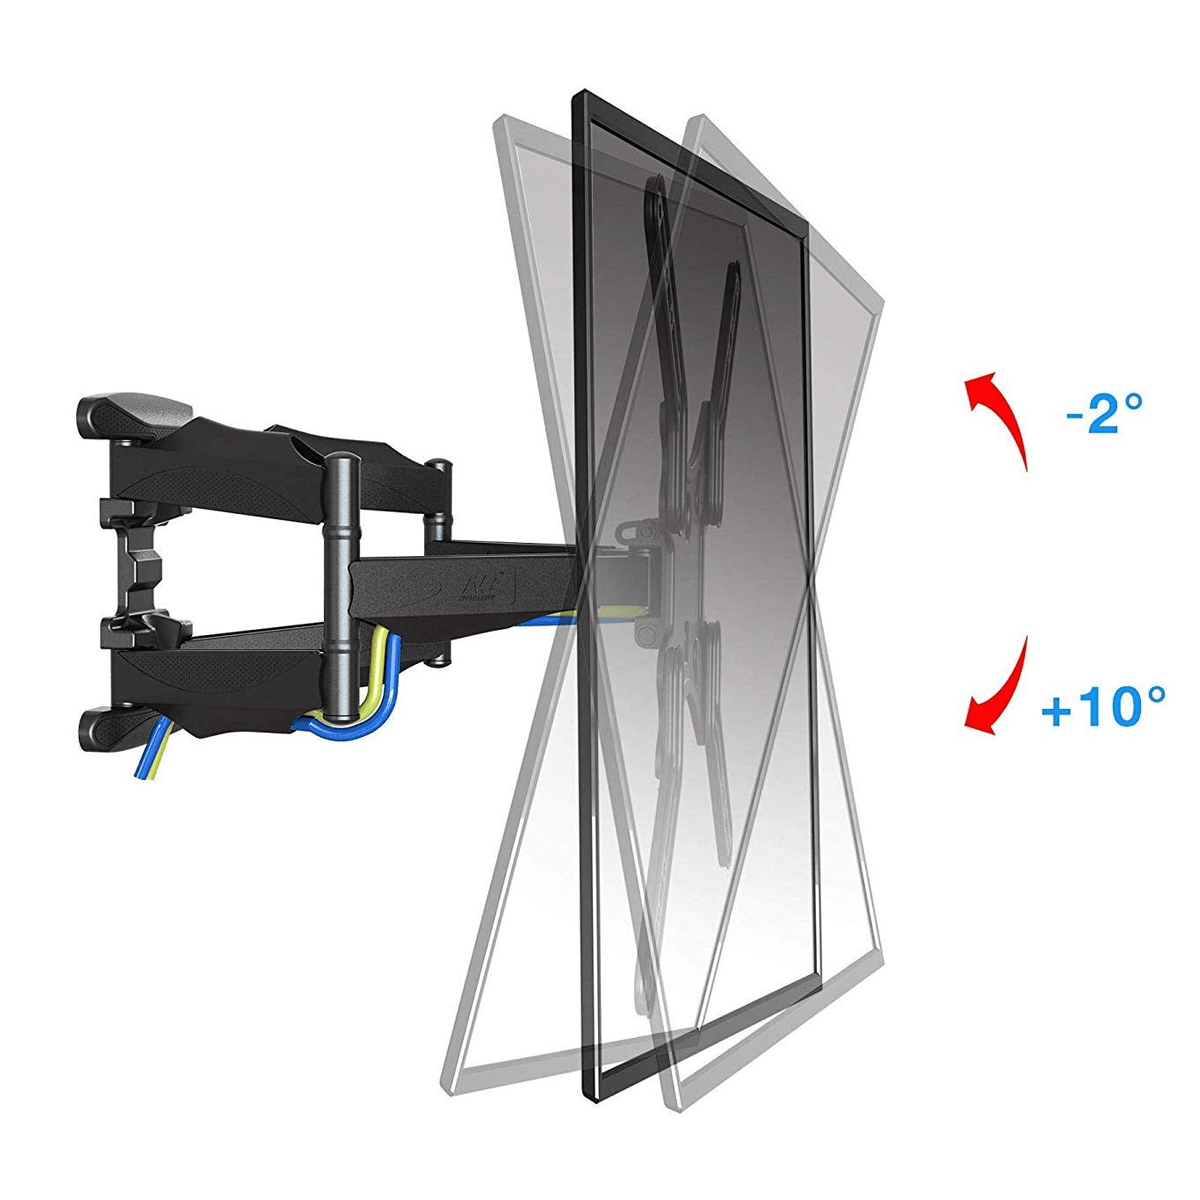 Full Motion TV Wall Mount for Most 32-55 Inches LED LCD Computer Monitors and TVs - NB